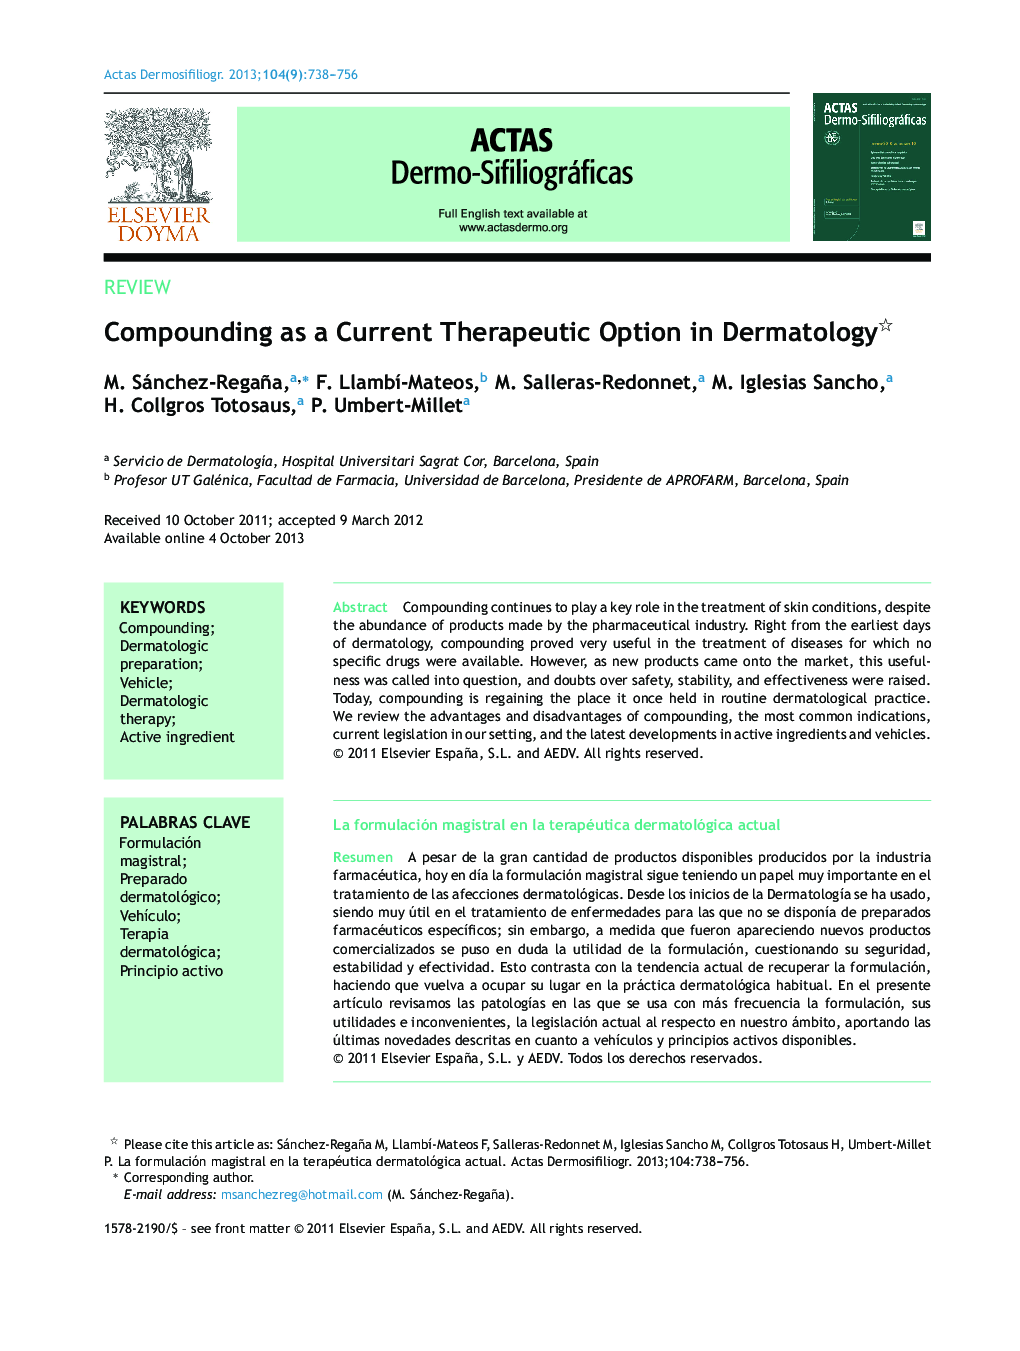 Compounding as a Current Therapeutic Option in Dermatology 